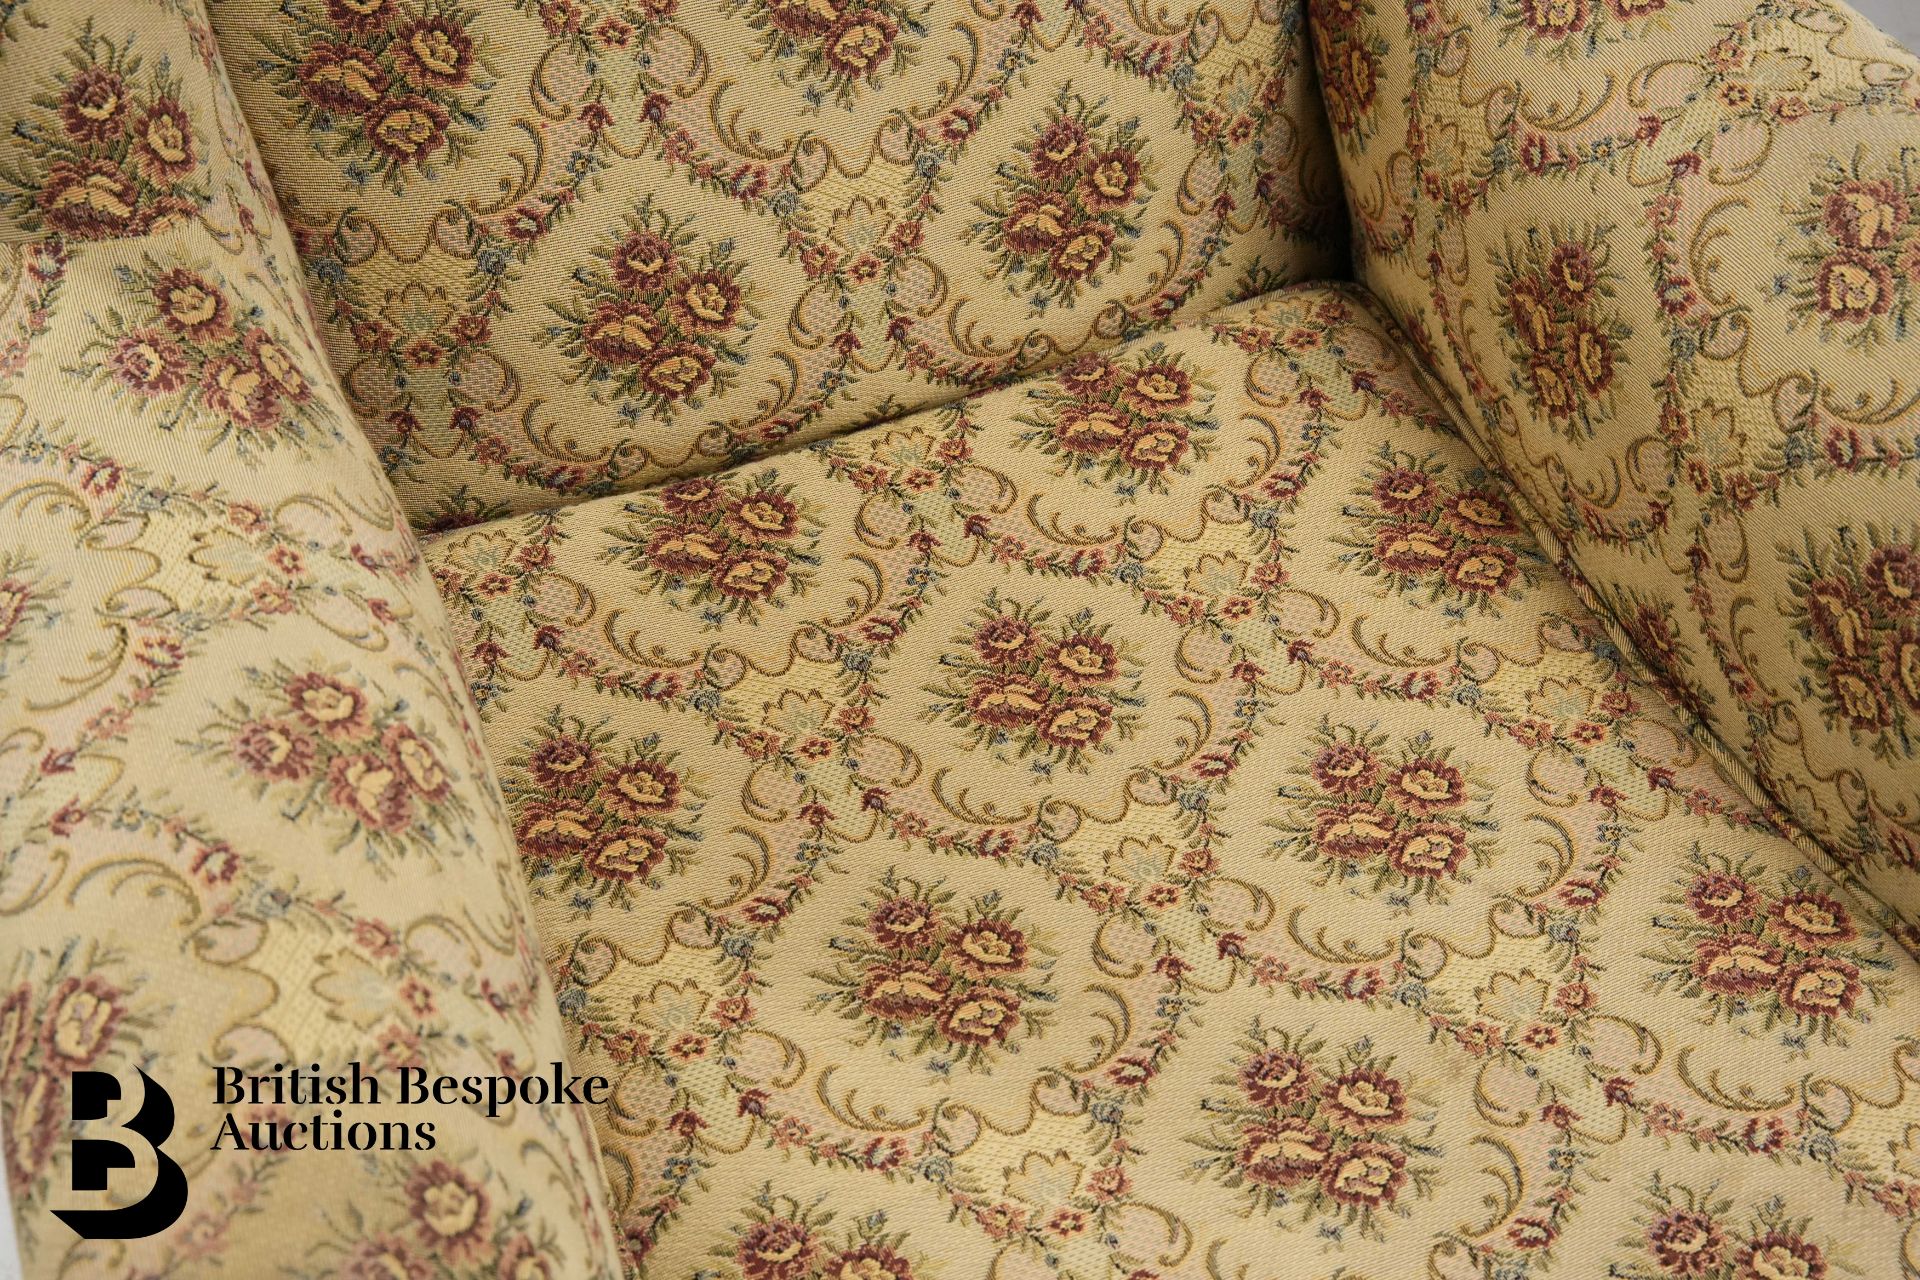 Queen Anne Wingback Chair - Image 6 of 7